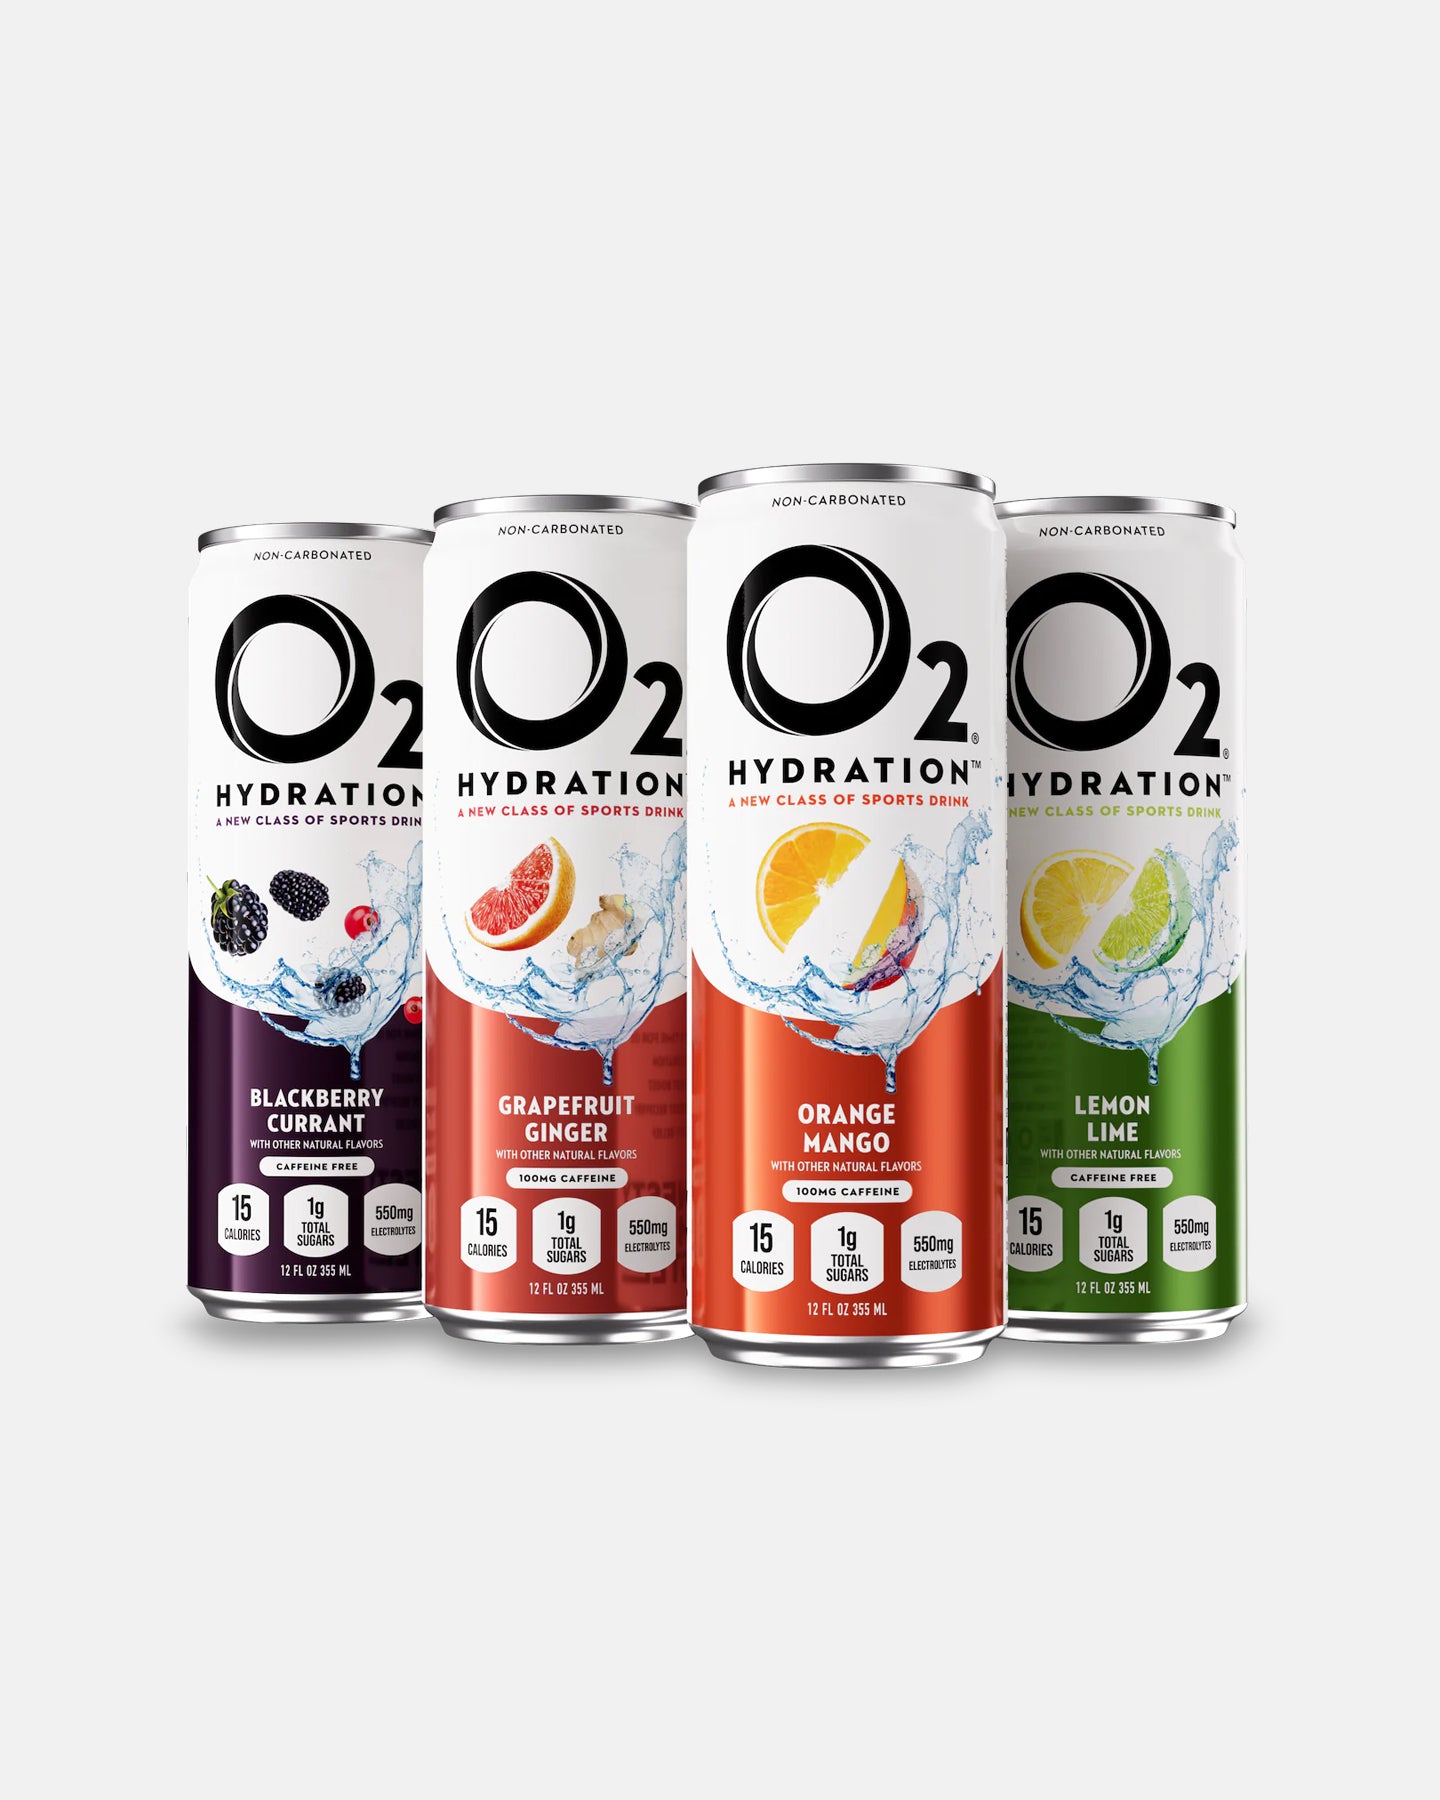 O2 OXYGENATED SPORTS RECOVERY DRINK